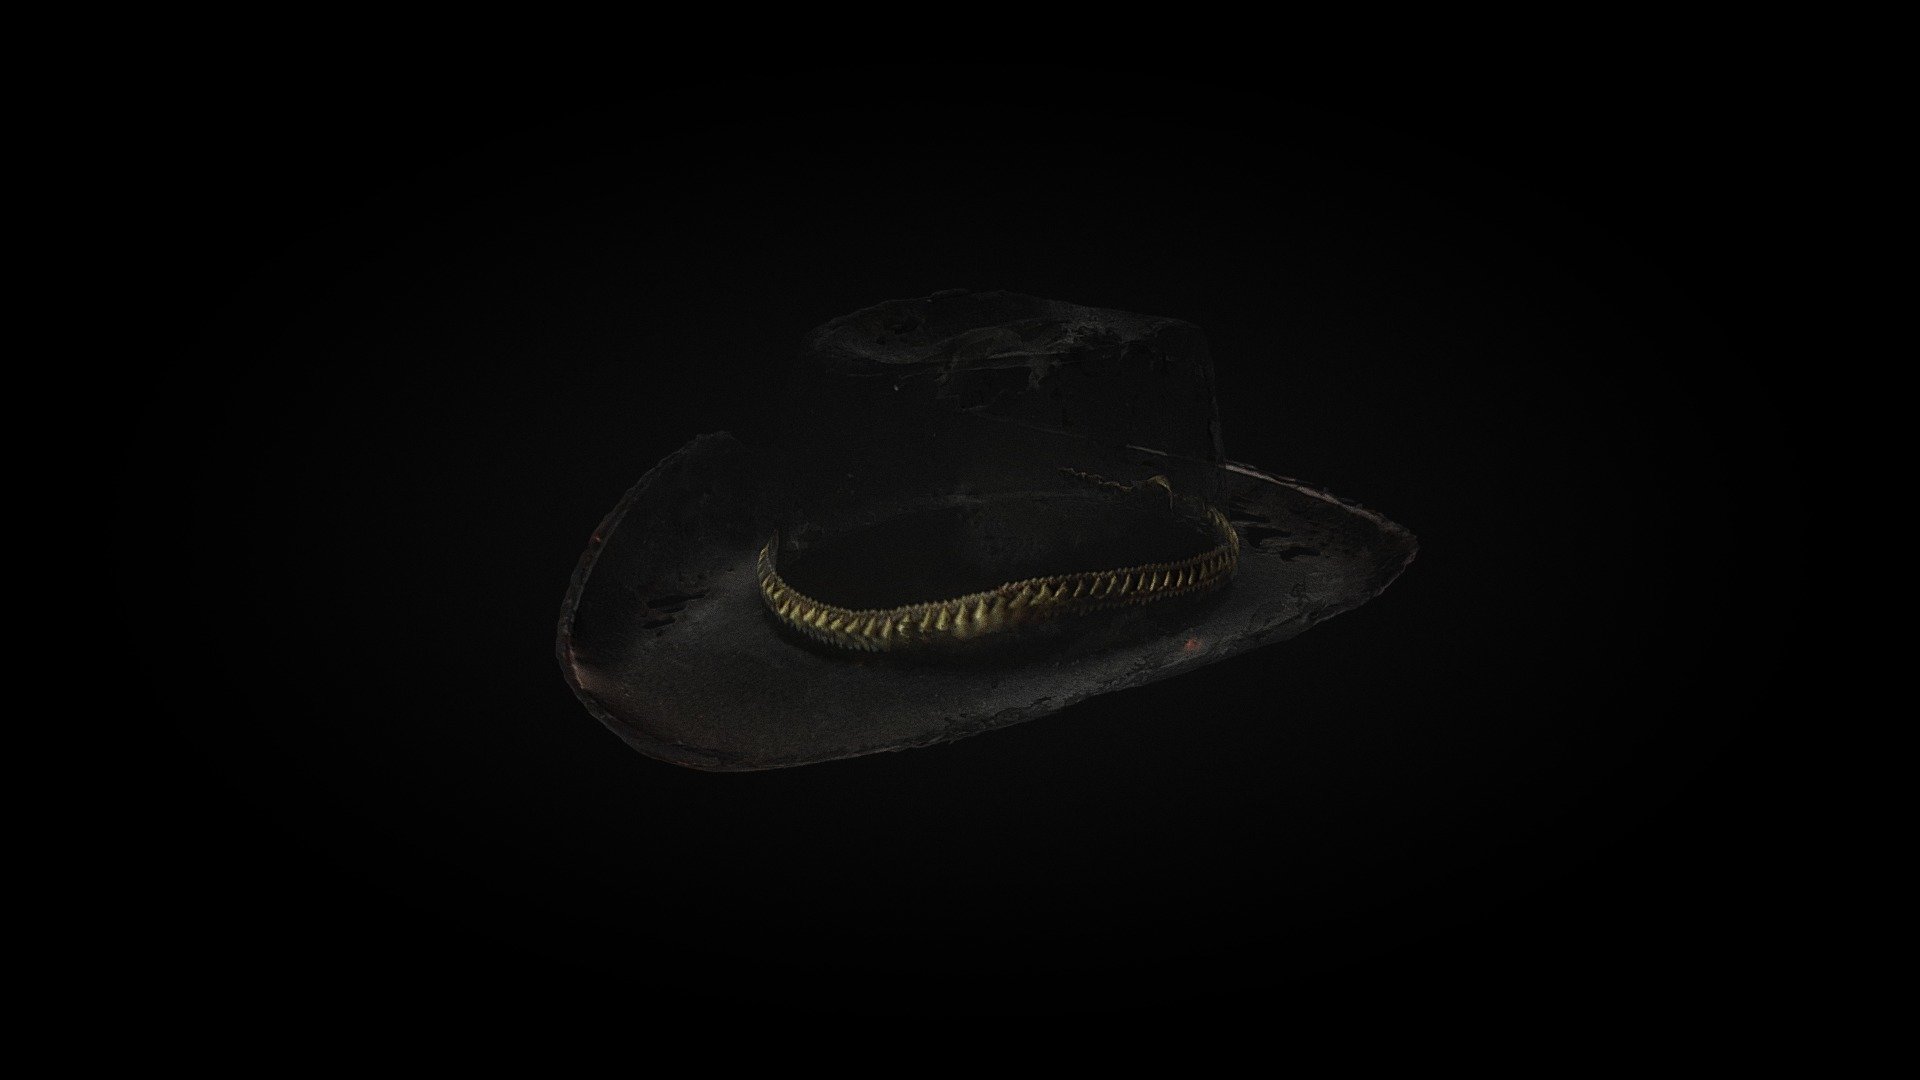 Another try of the built-in scanning app on the new HP Sprout - INVISIBLE COWBOY HAT - 3D model by l o u i s (@louis) 3d model